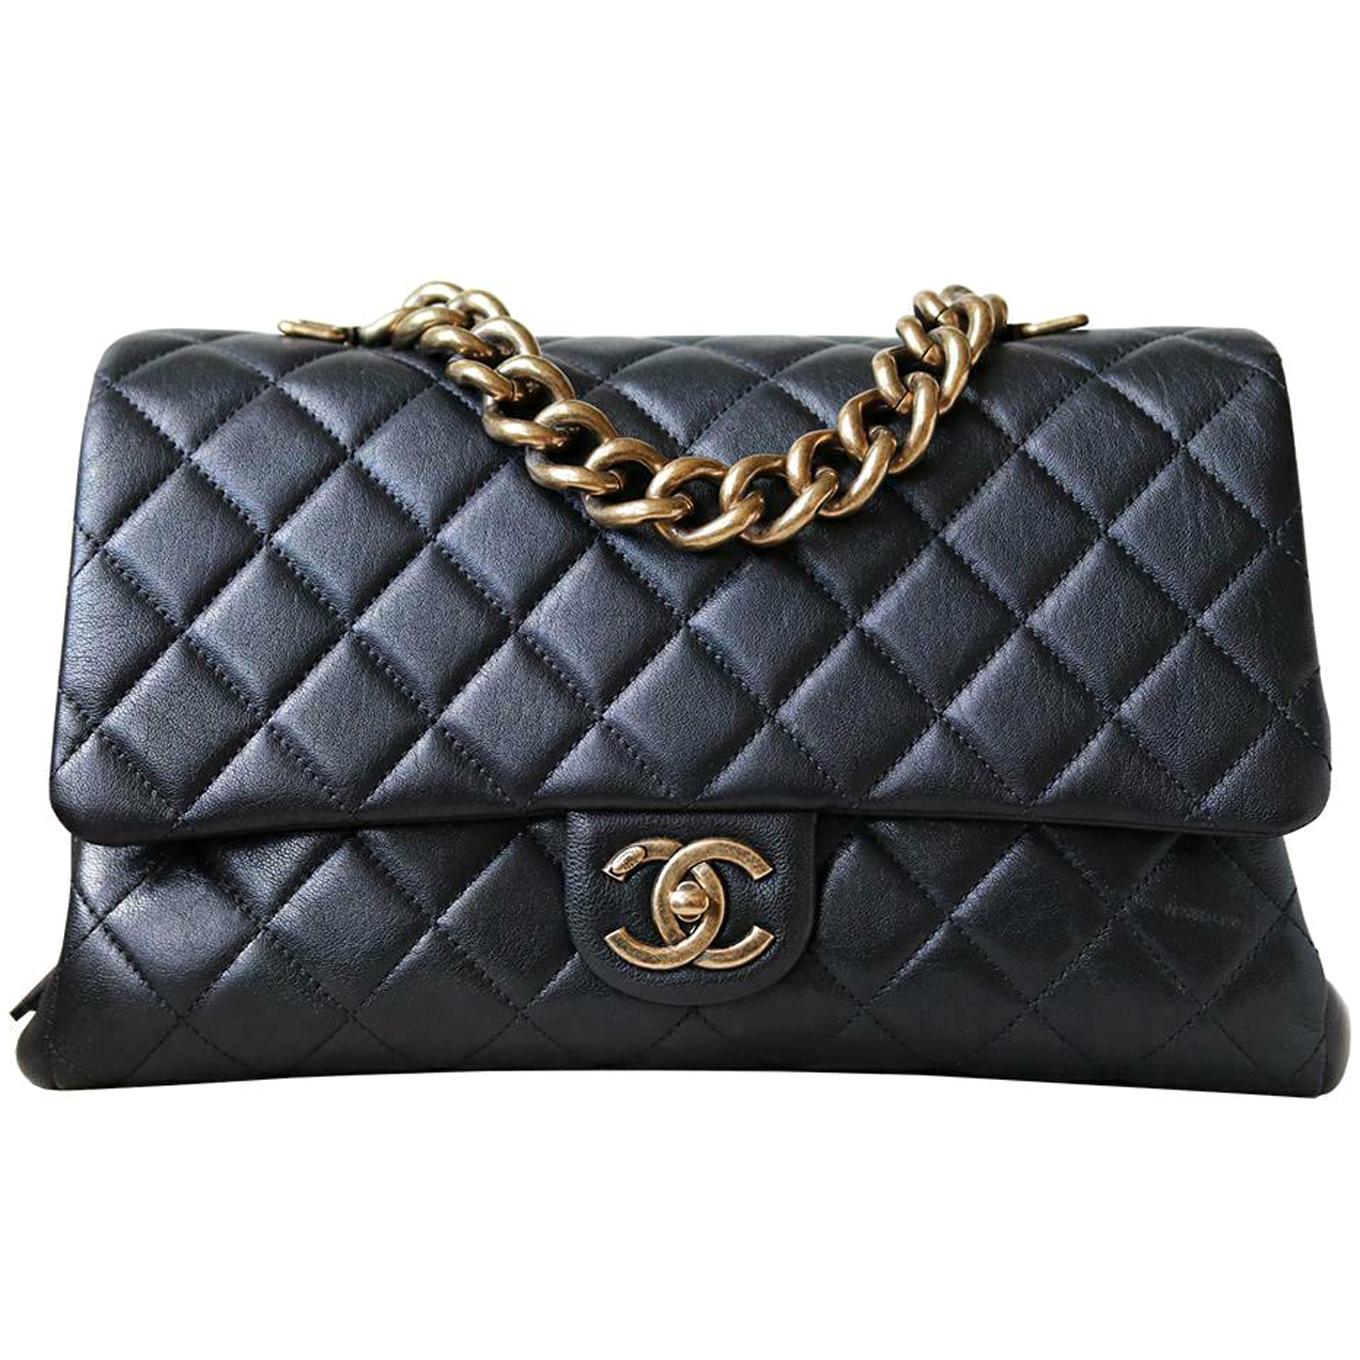 Chanel Quilted Leather Large Trapezio Flap Bag